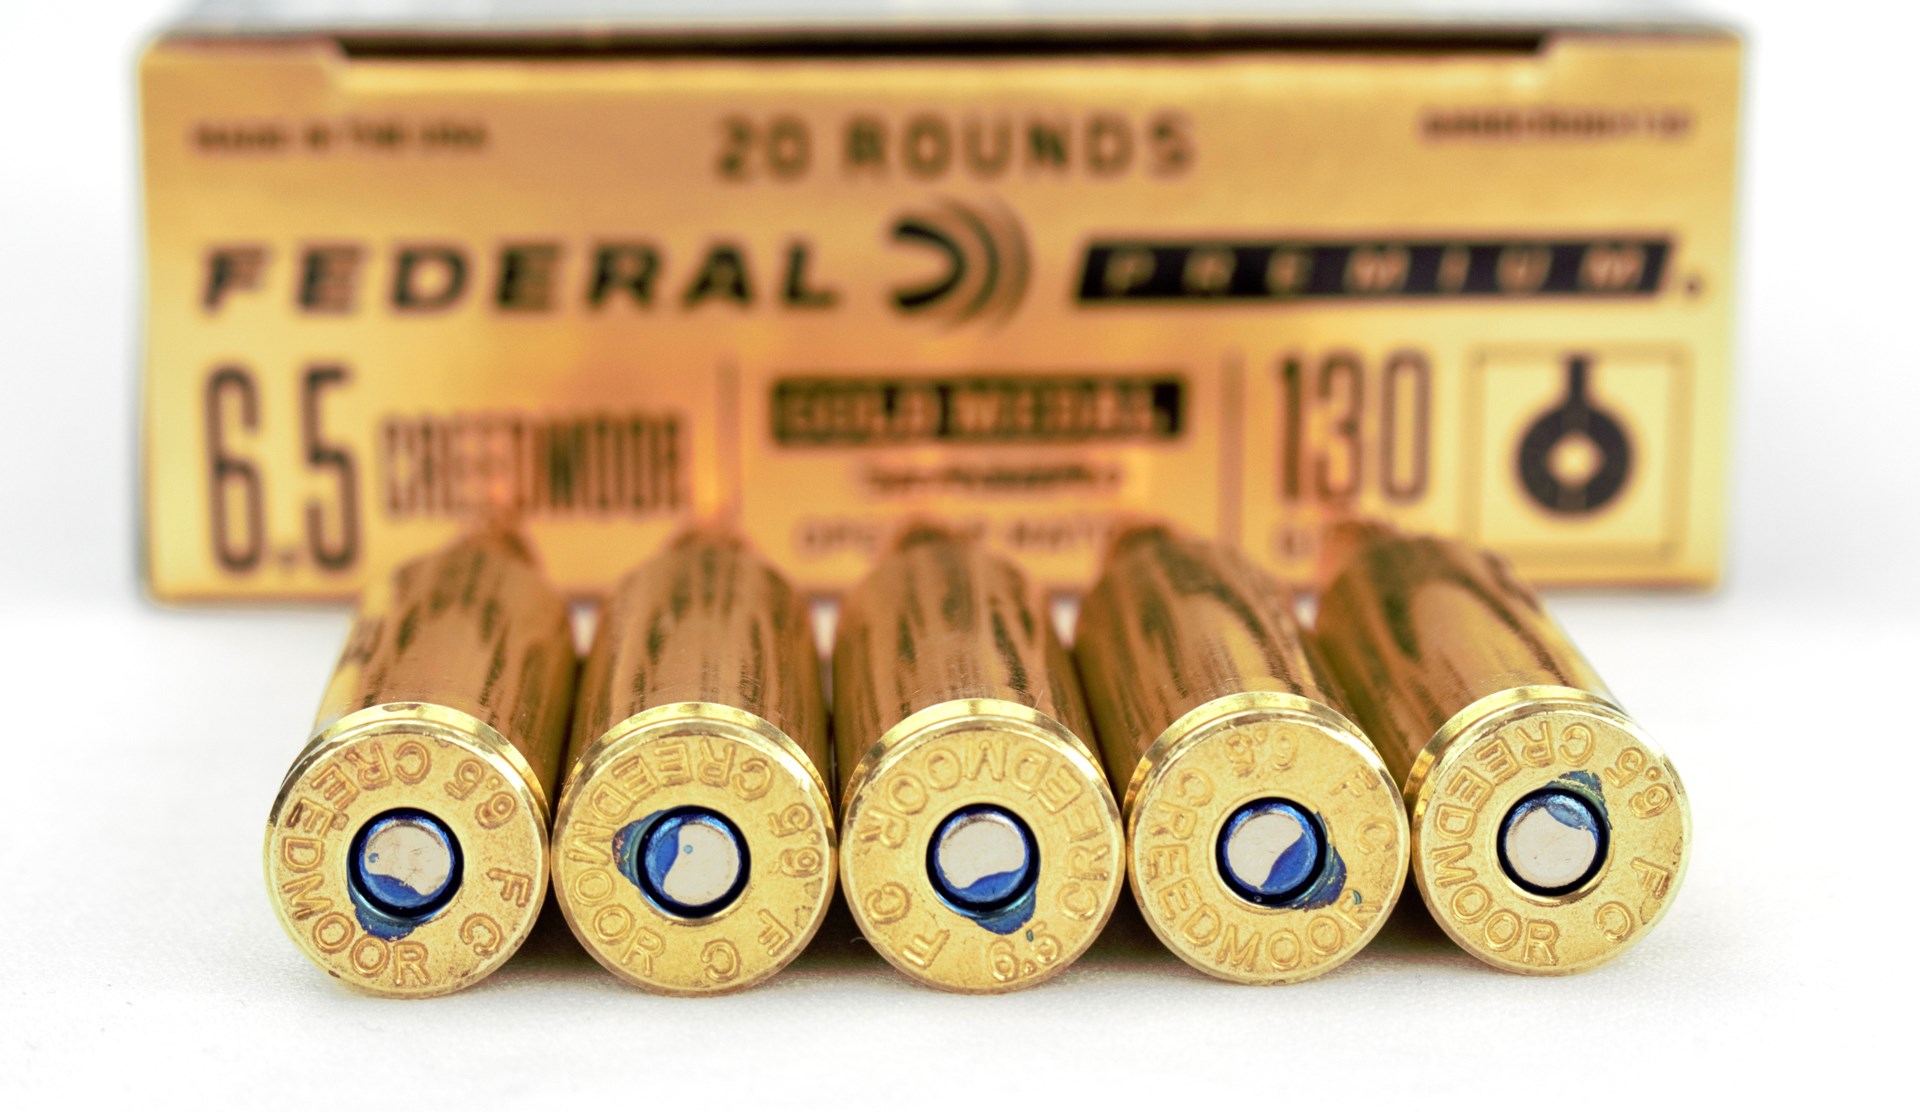 Federal Premium box background with five rounds cartridges 6.5 mm creedmoor bullets ammo casehead focus foreground